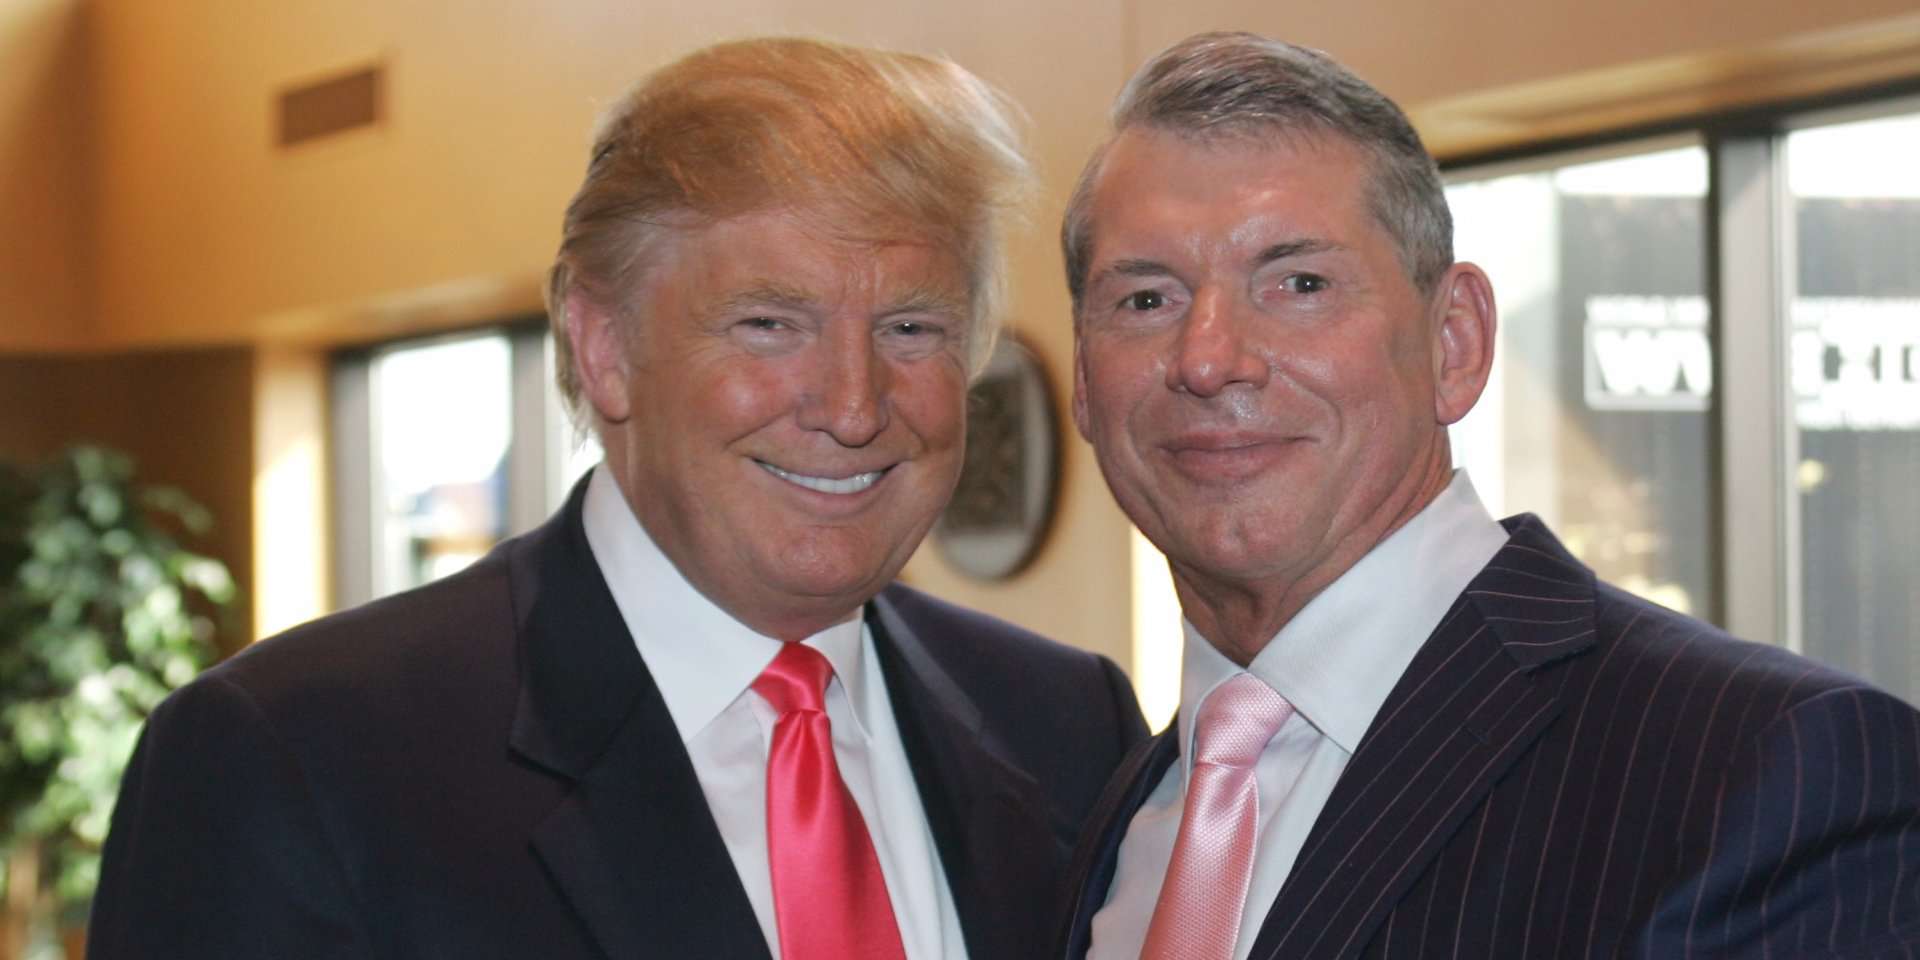 Taboola Ad Example 60648 - Donald Trump's Connection With Vince McMahon And WWE Spans Decades